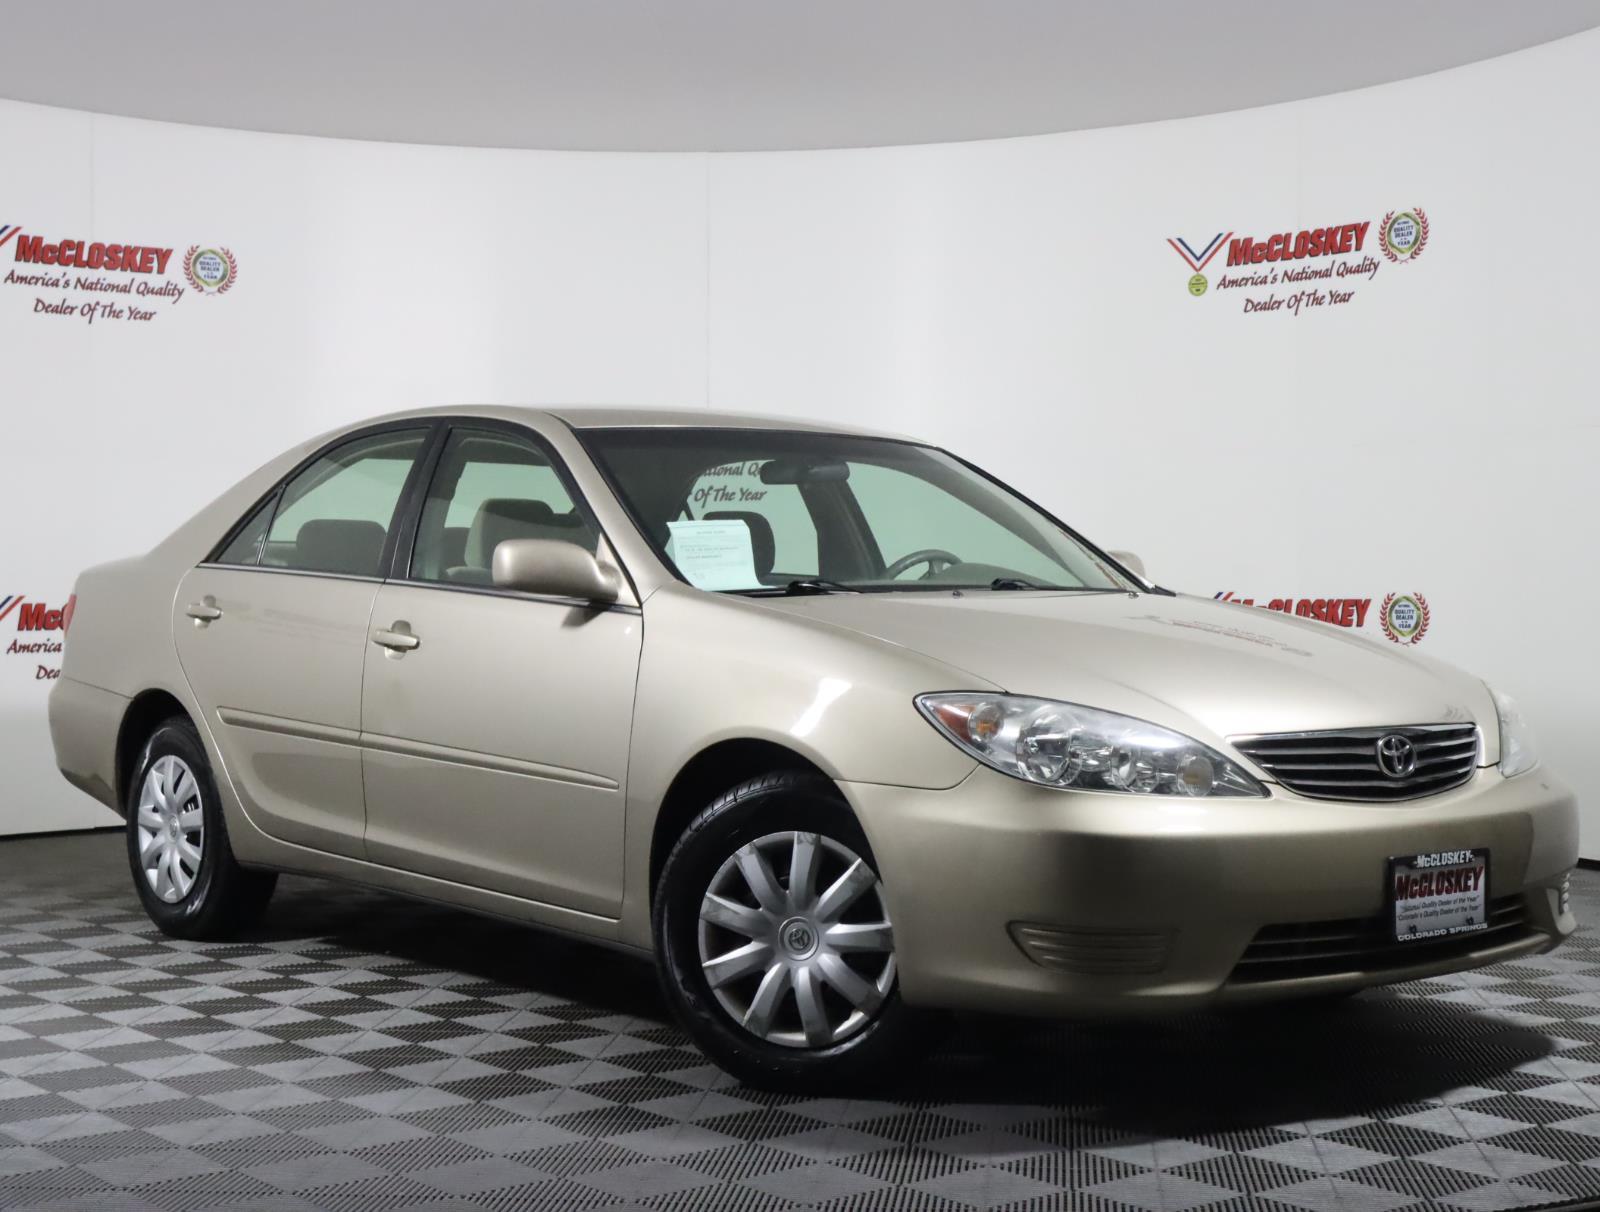 Preowned 2005 TOYOTA Camry LE for sale by McCloskey Imports & 4X4's in Colorado Springs, CO